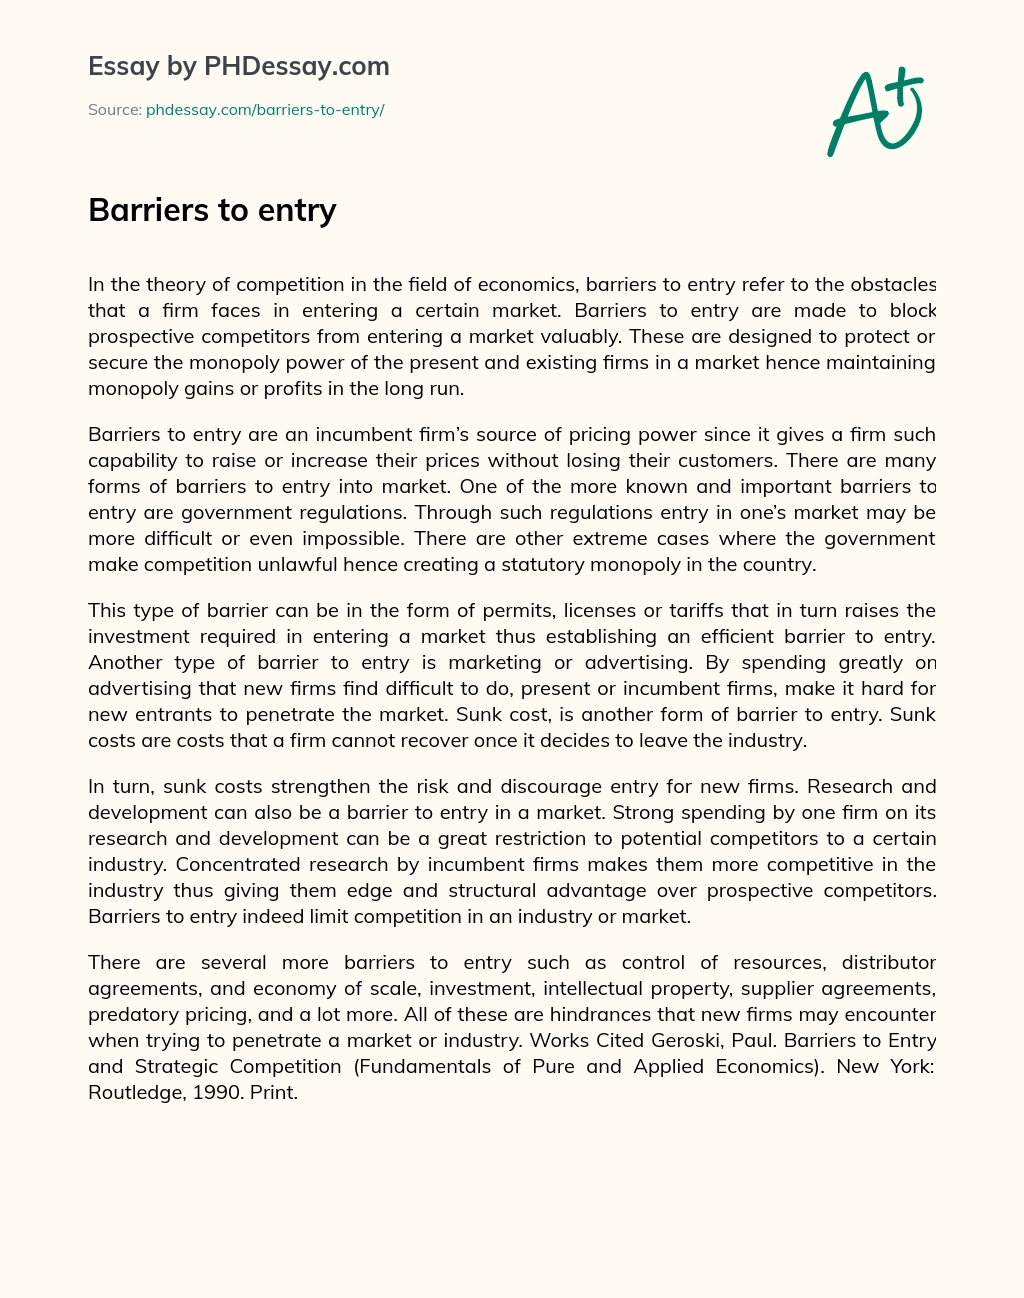 Barriers to entry essay